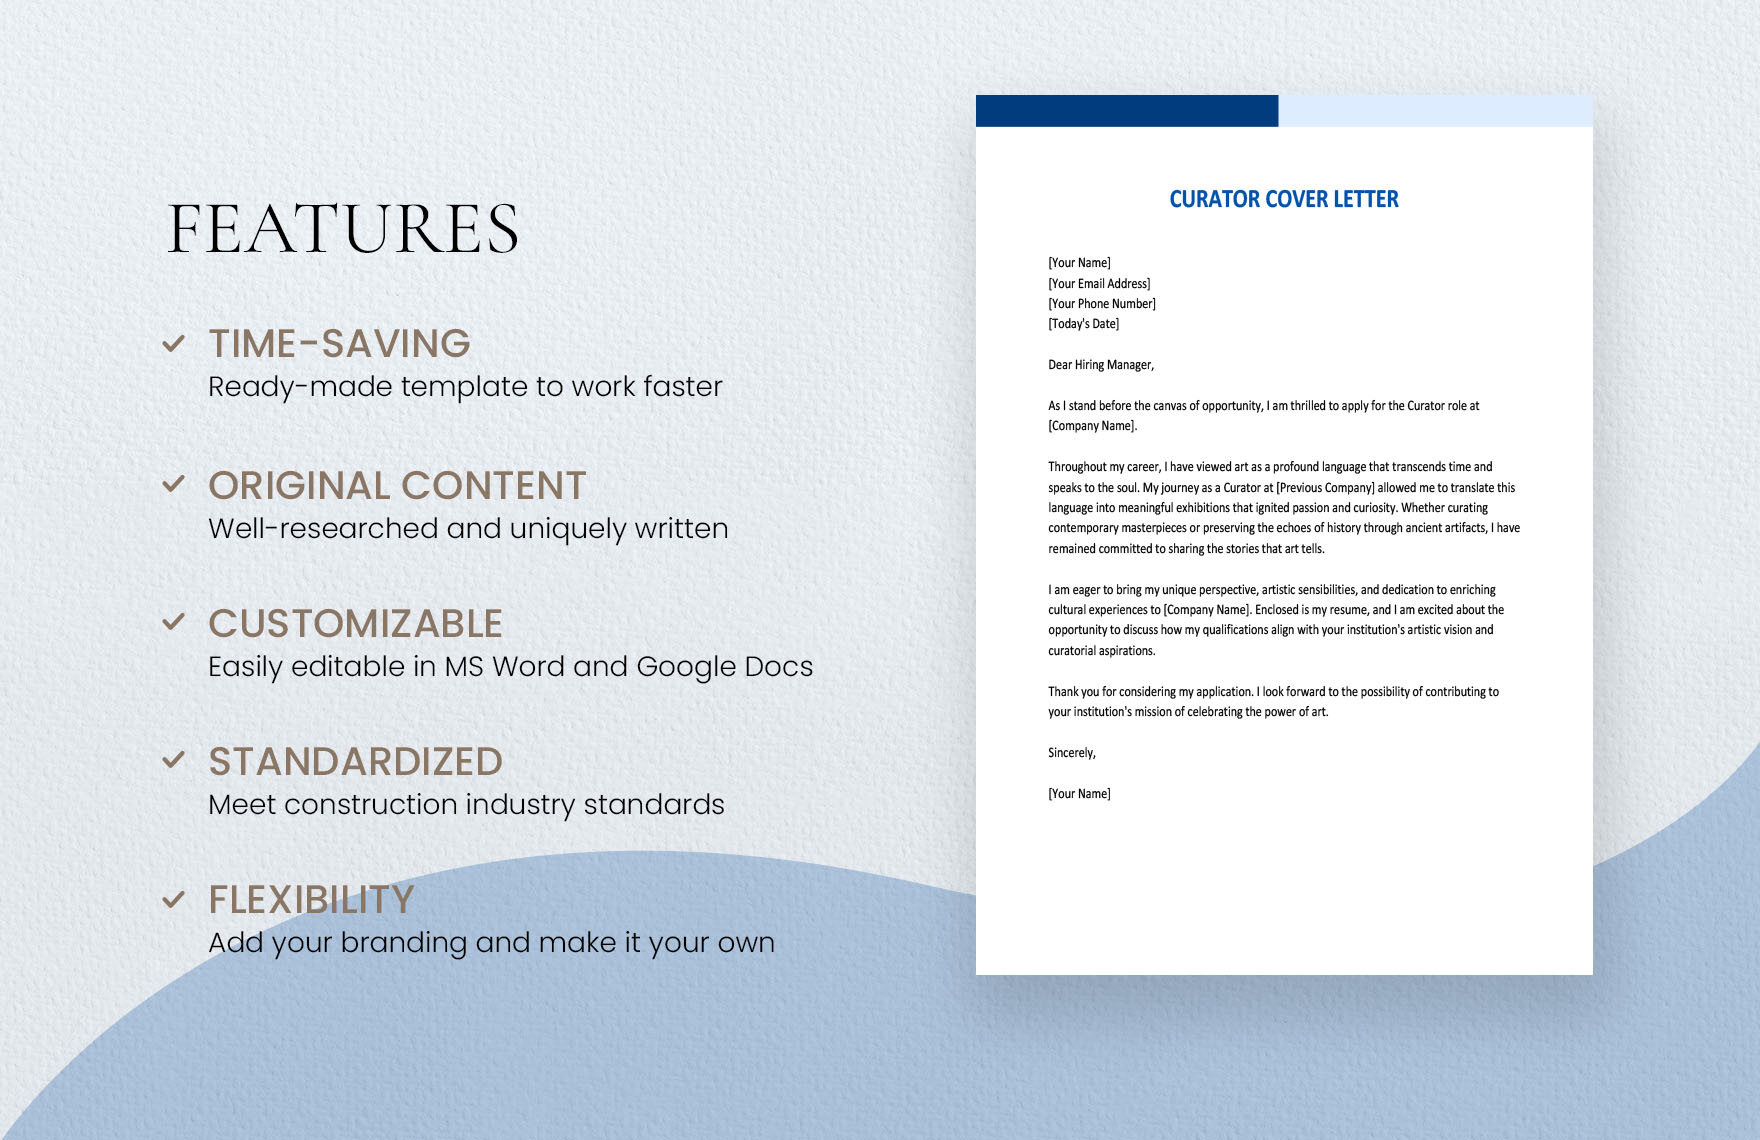 Curator Cover Letter